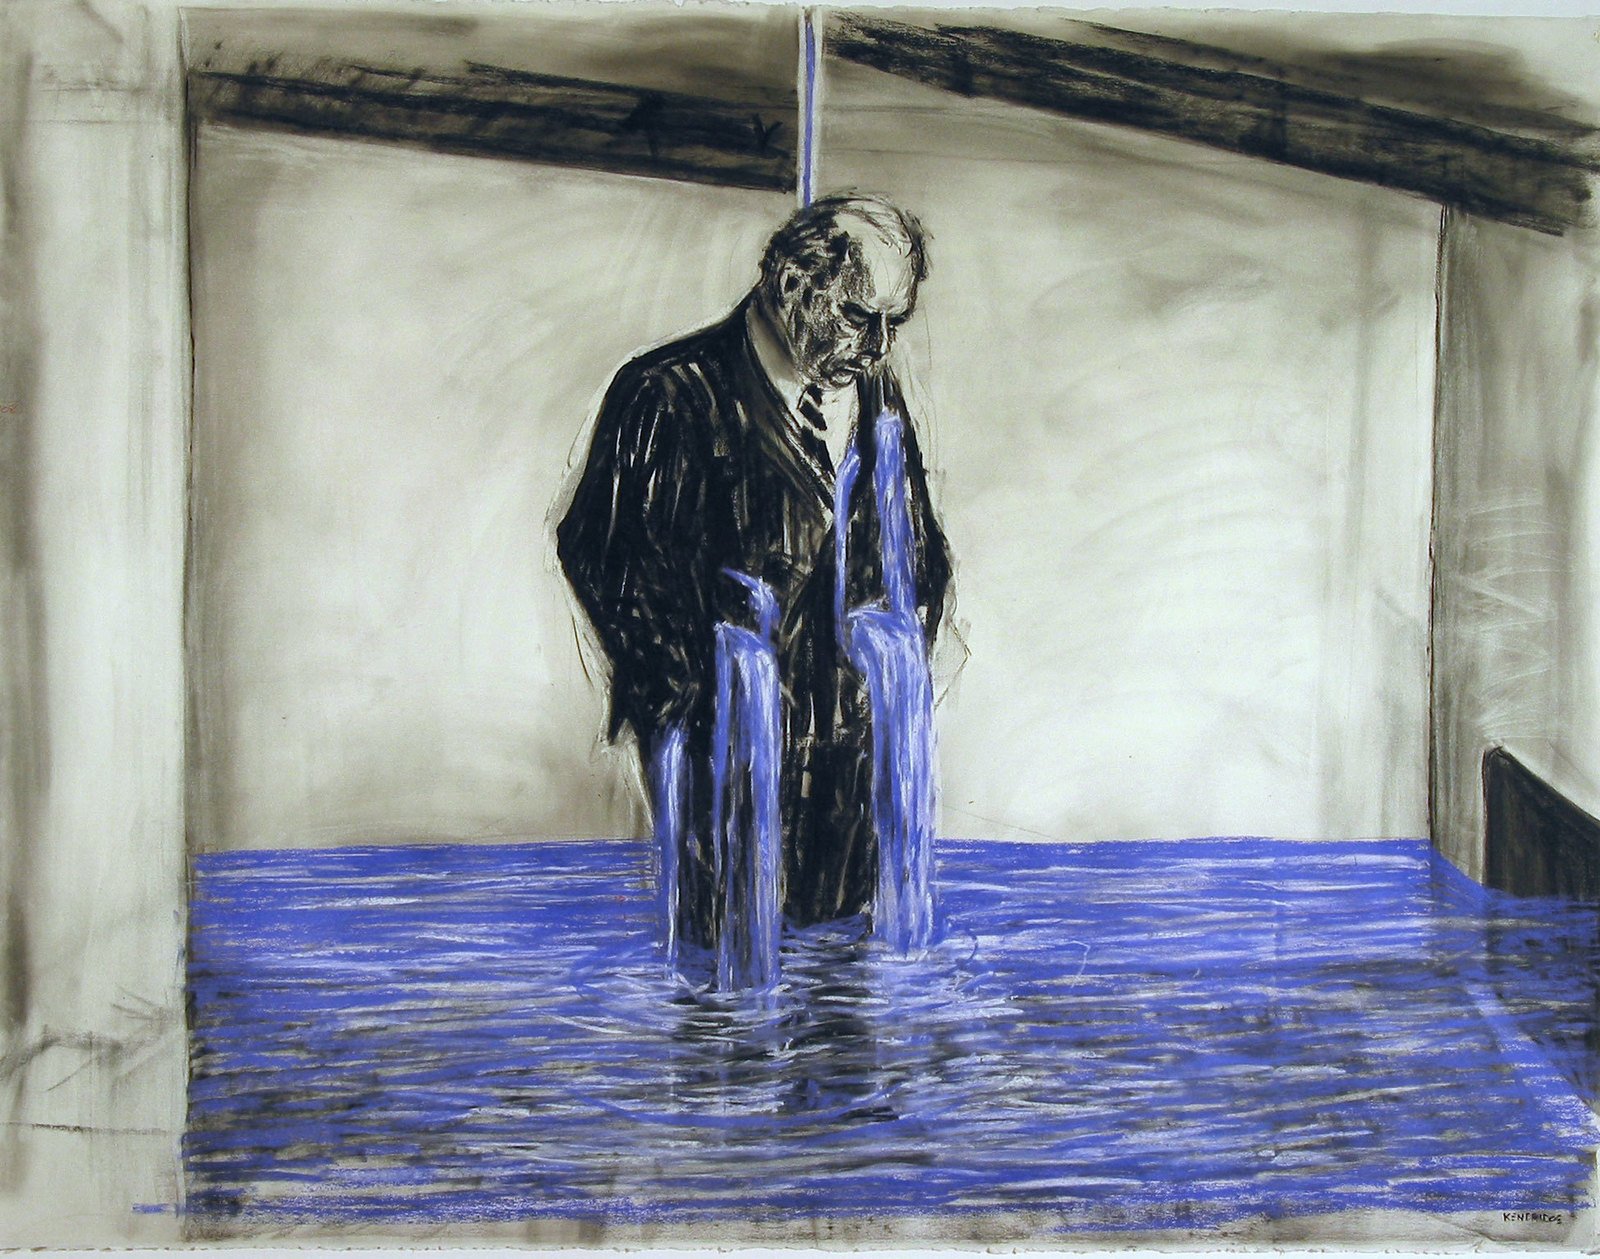 William Kentridge.&nbsp;Drawing from Stereoscope.&nbsp;1998&ndash;99. Charcoal, pastel, and colored pencil on paper, 47 1/4 &times; 63&Prime; (120 &times; 160 cm). The Museum of Modern Art, New York. Gift of The Junior Associates of The Museum of Modern Art, with special contributions from Anonymous, Scott J. Lorinsky, Yasufumi Nakamura, and The Wider Foundation